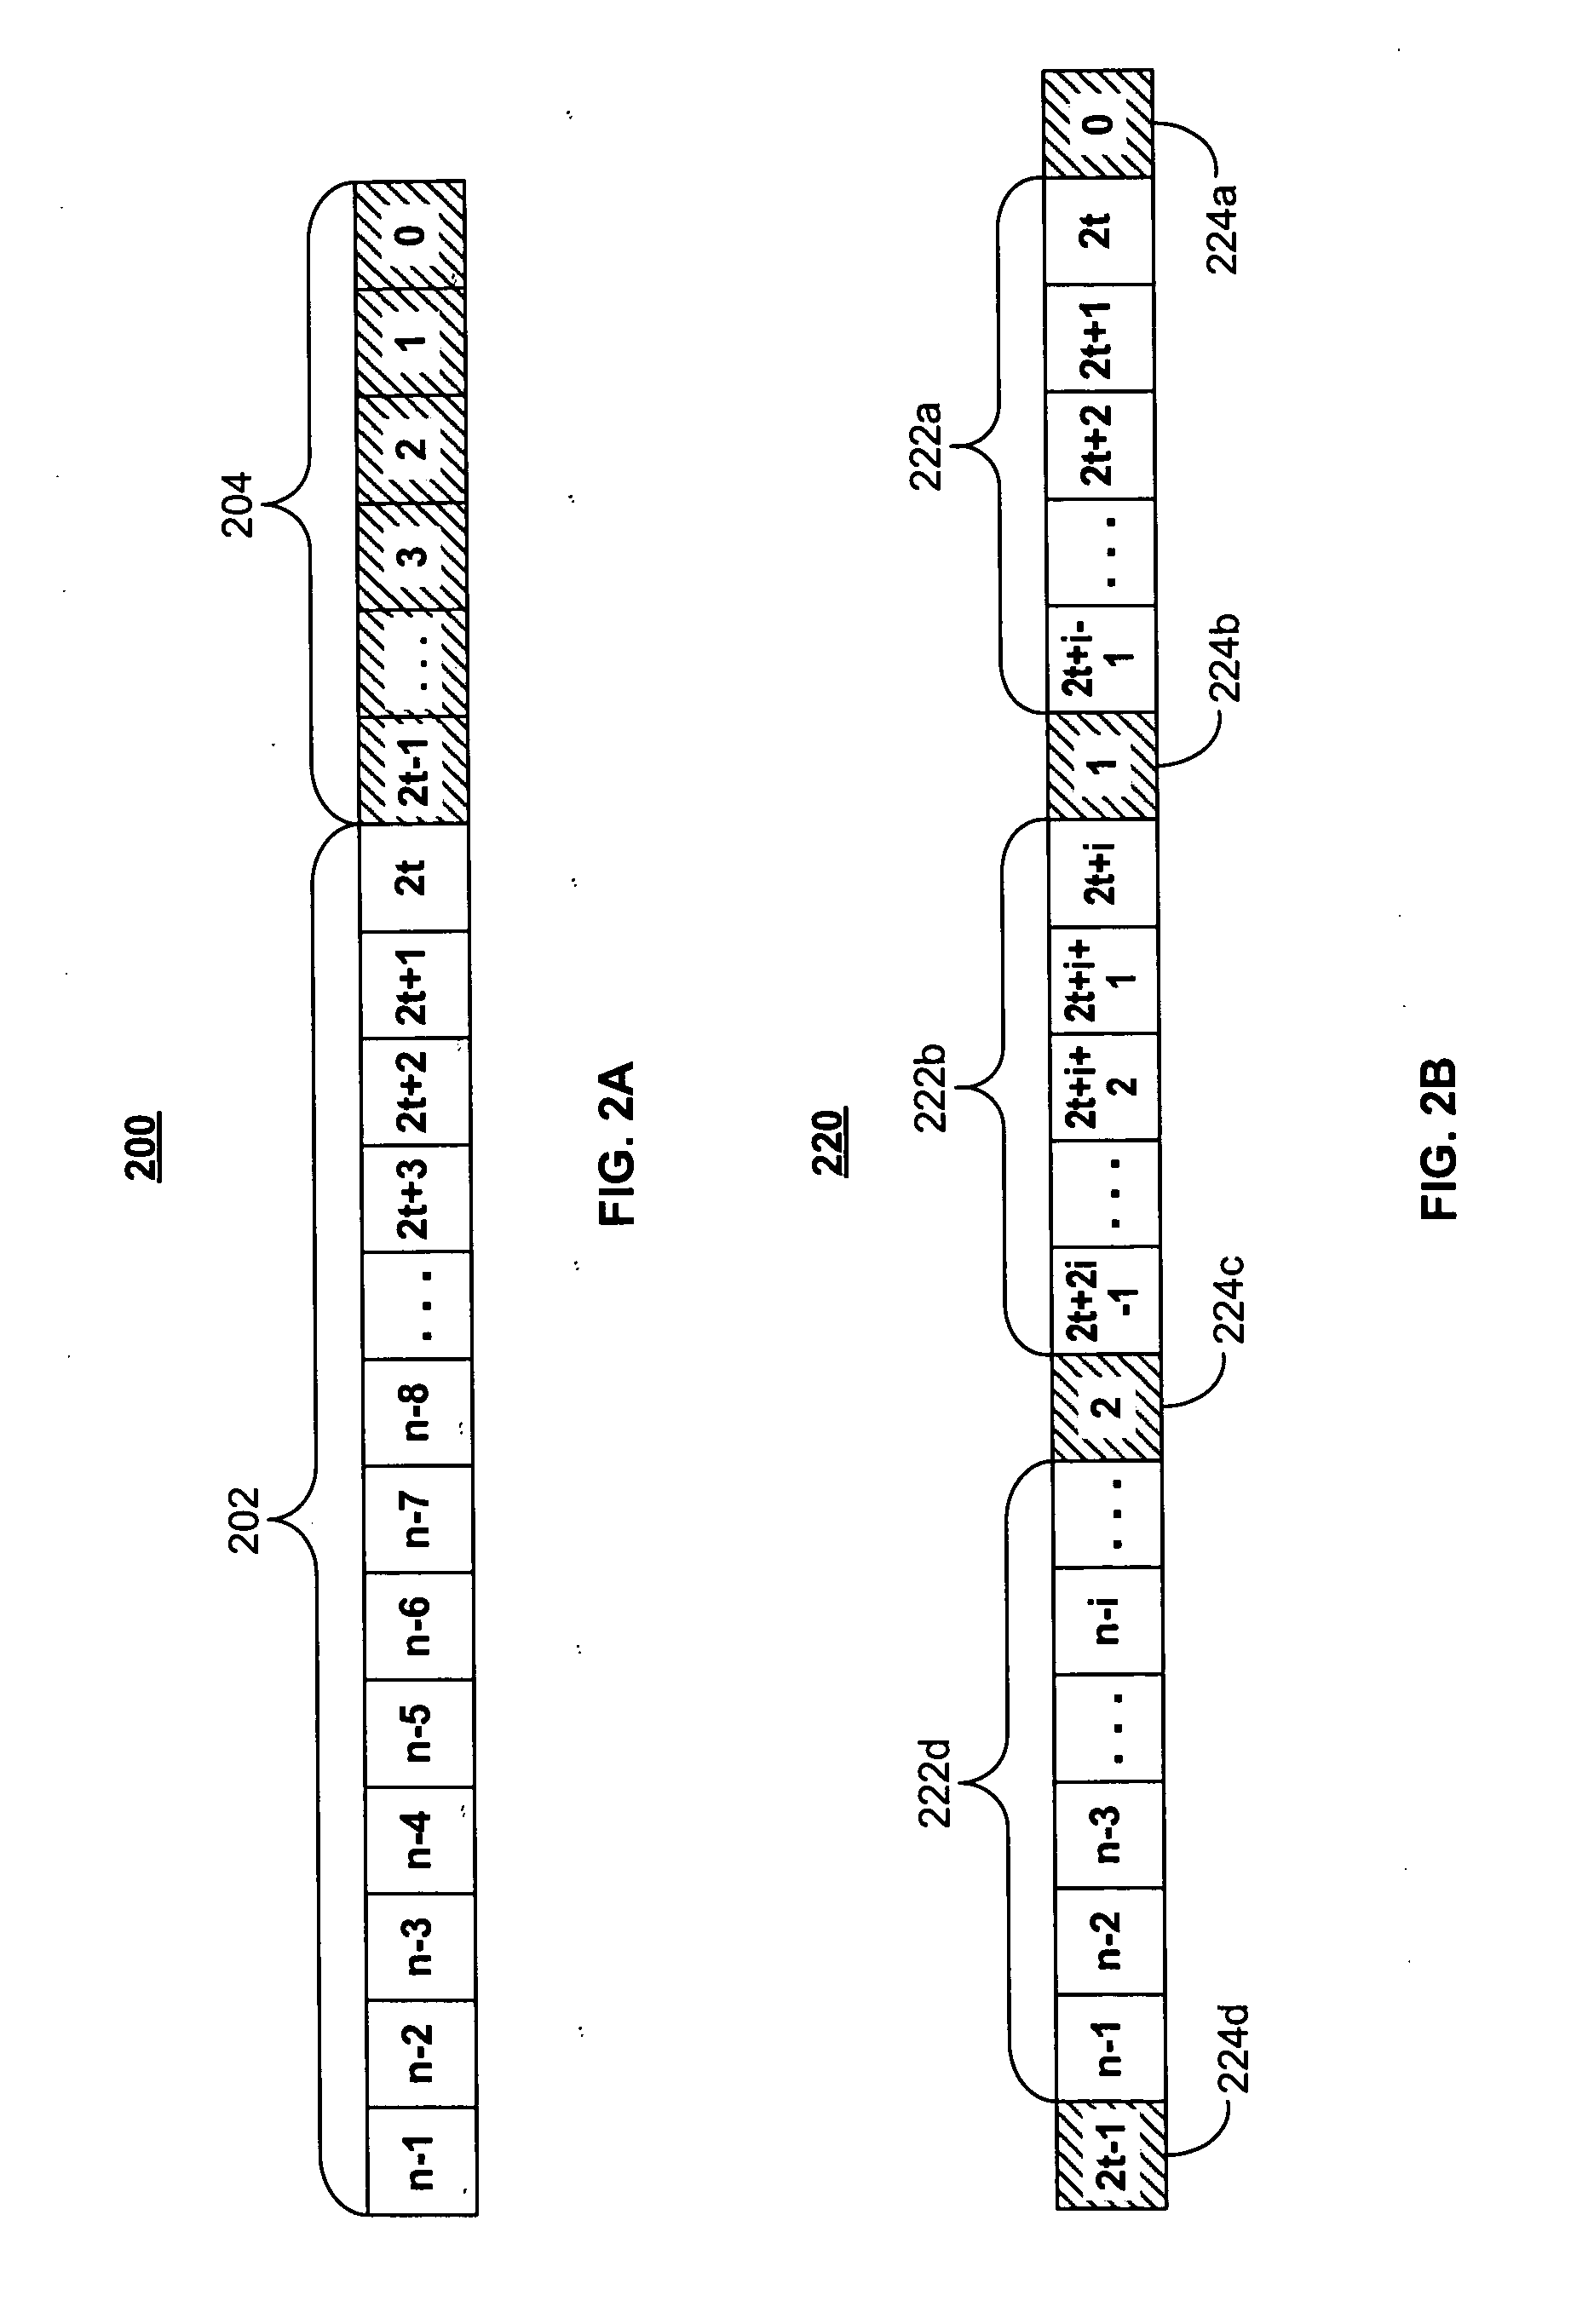 Systems and methods for achieving higher coding rate using parity interleaving